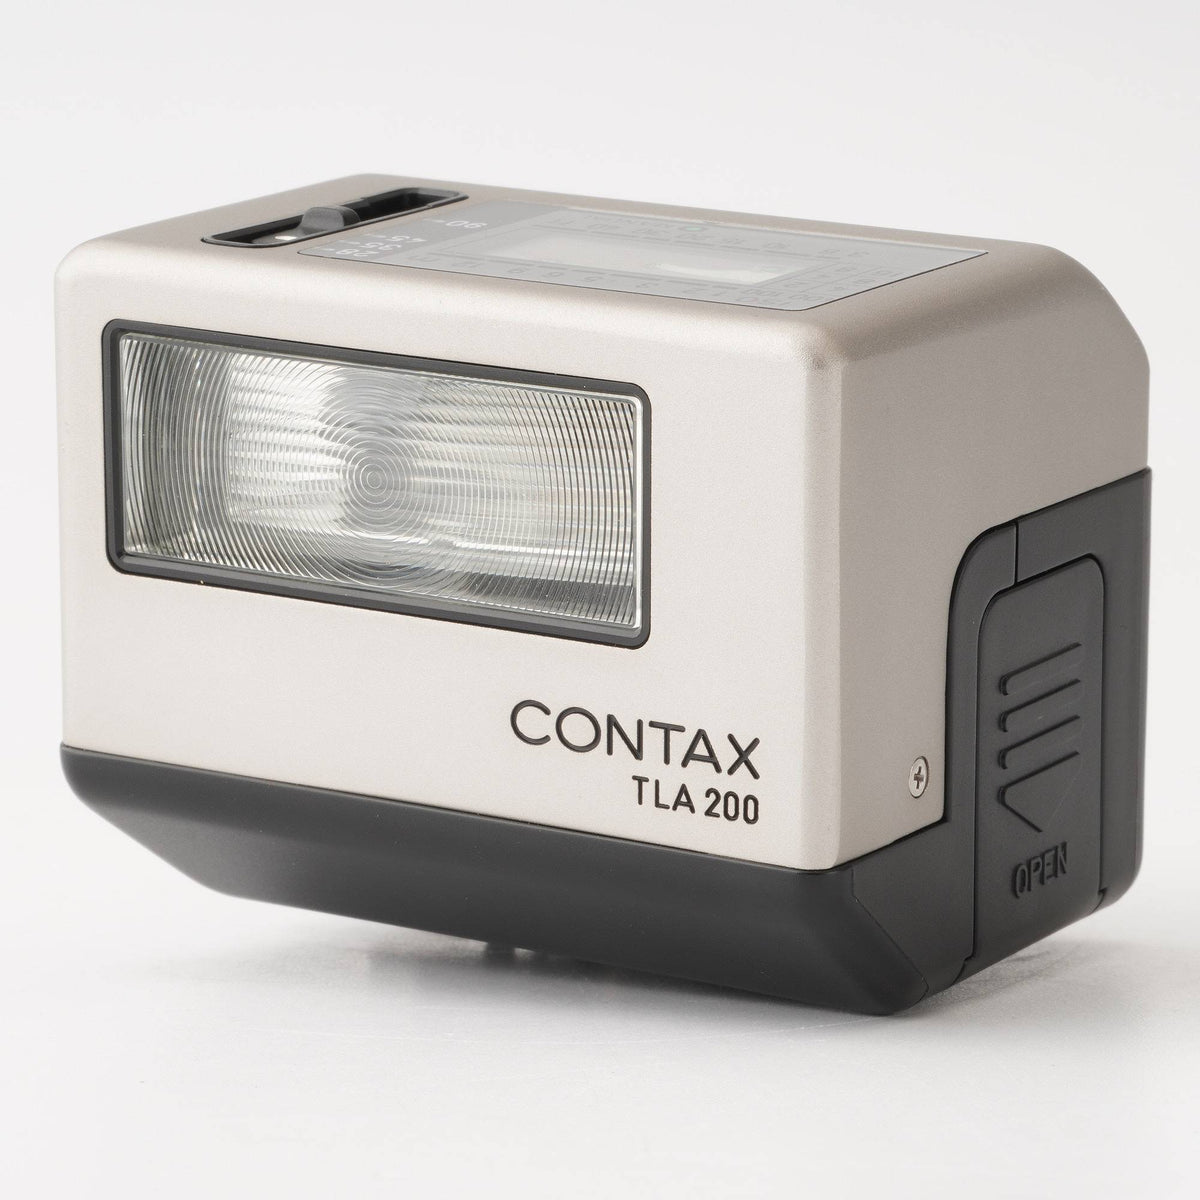 Contax TLA 200 Shoe Mount Flash for Contax G1 G2